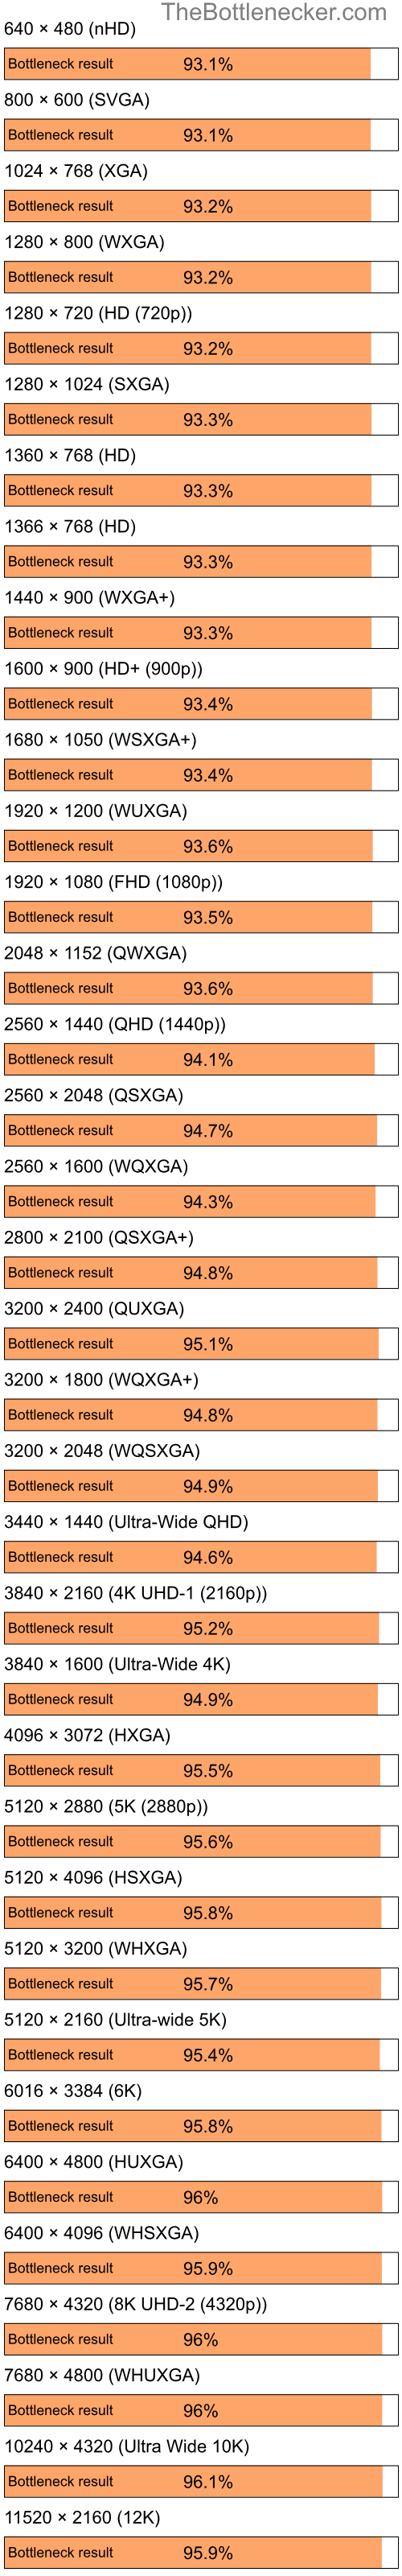 Bottleneck results by resolution for Intel Pentium 4 and NVIDIA GeForce2 MX in Graphic Card Intense Tasks